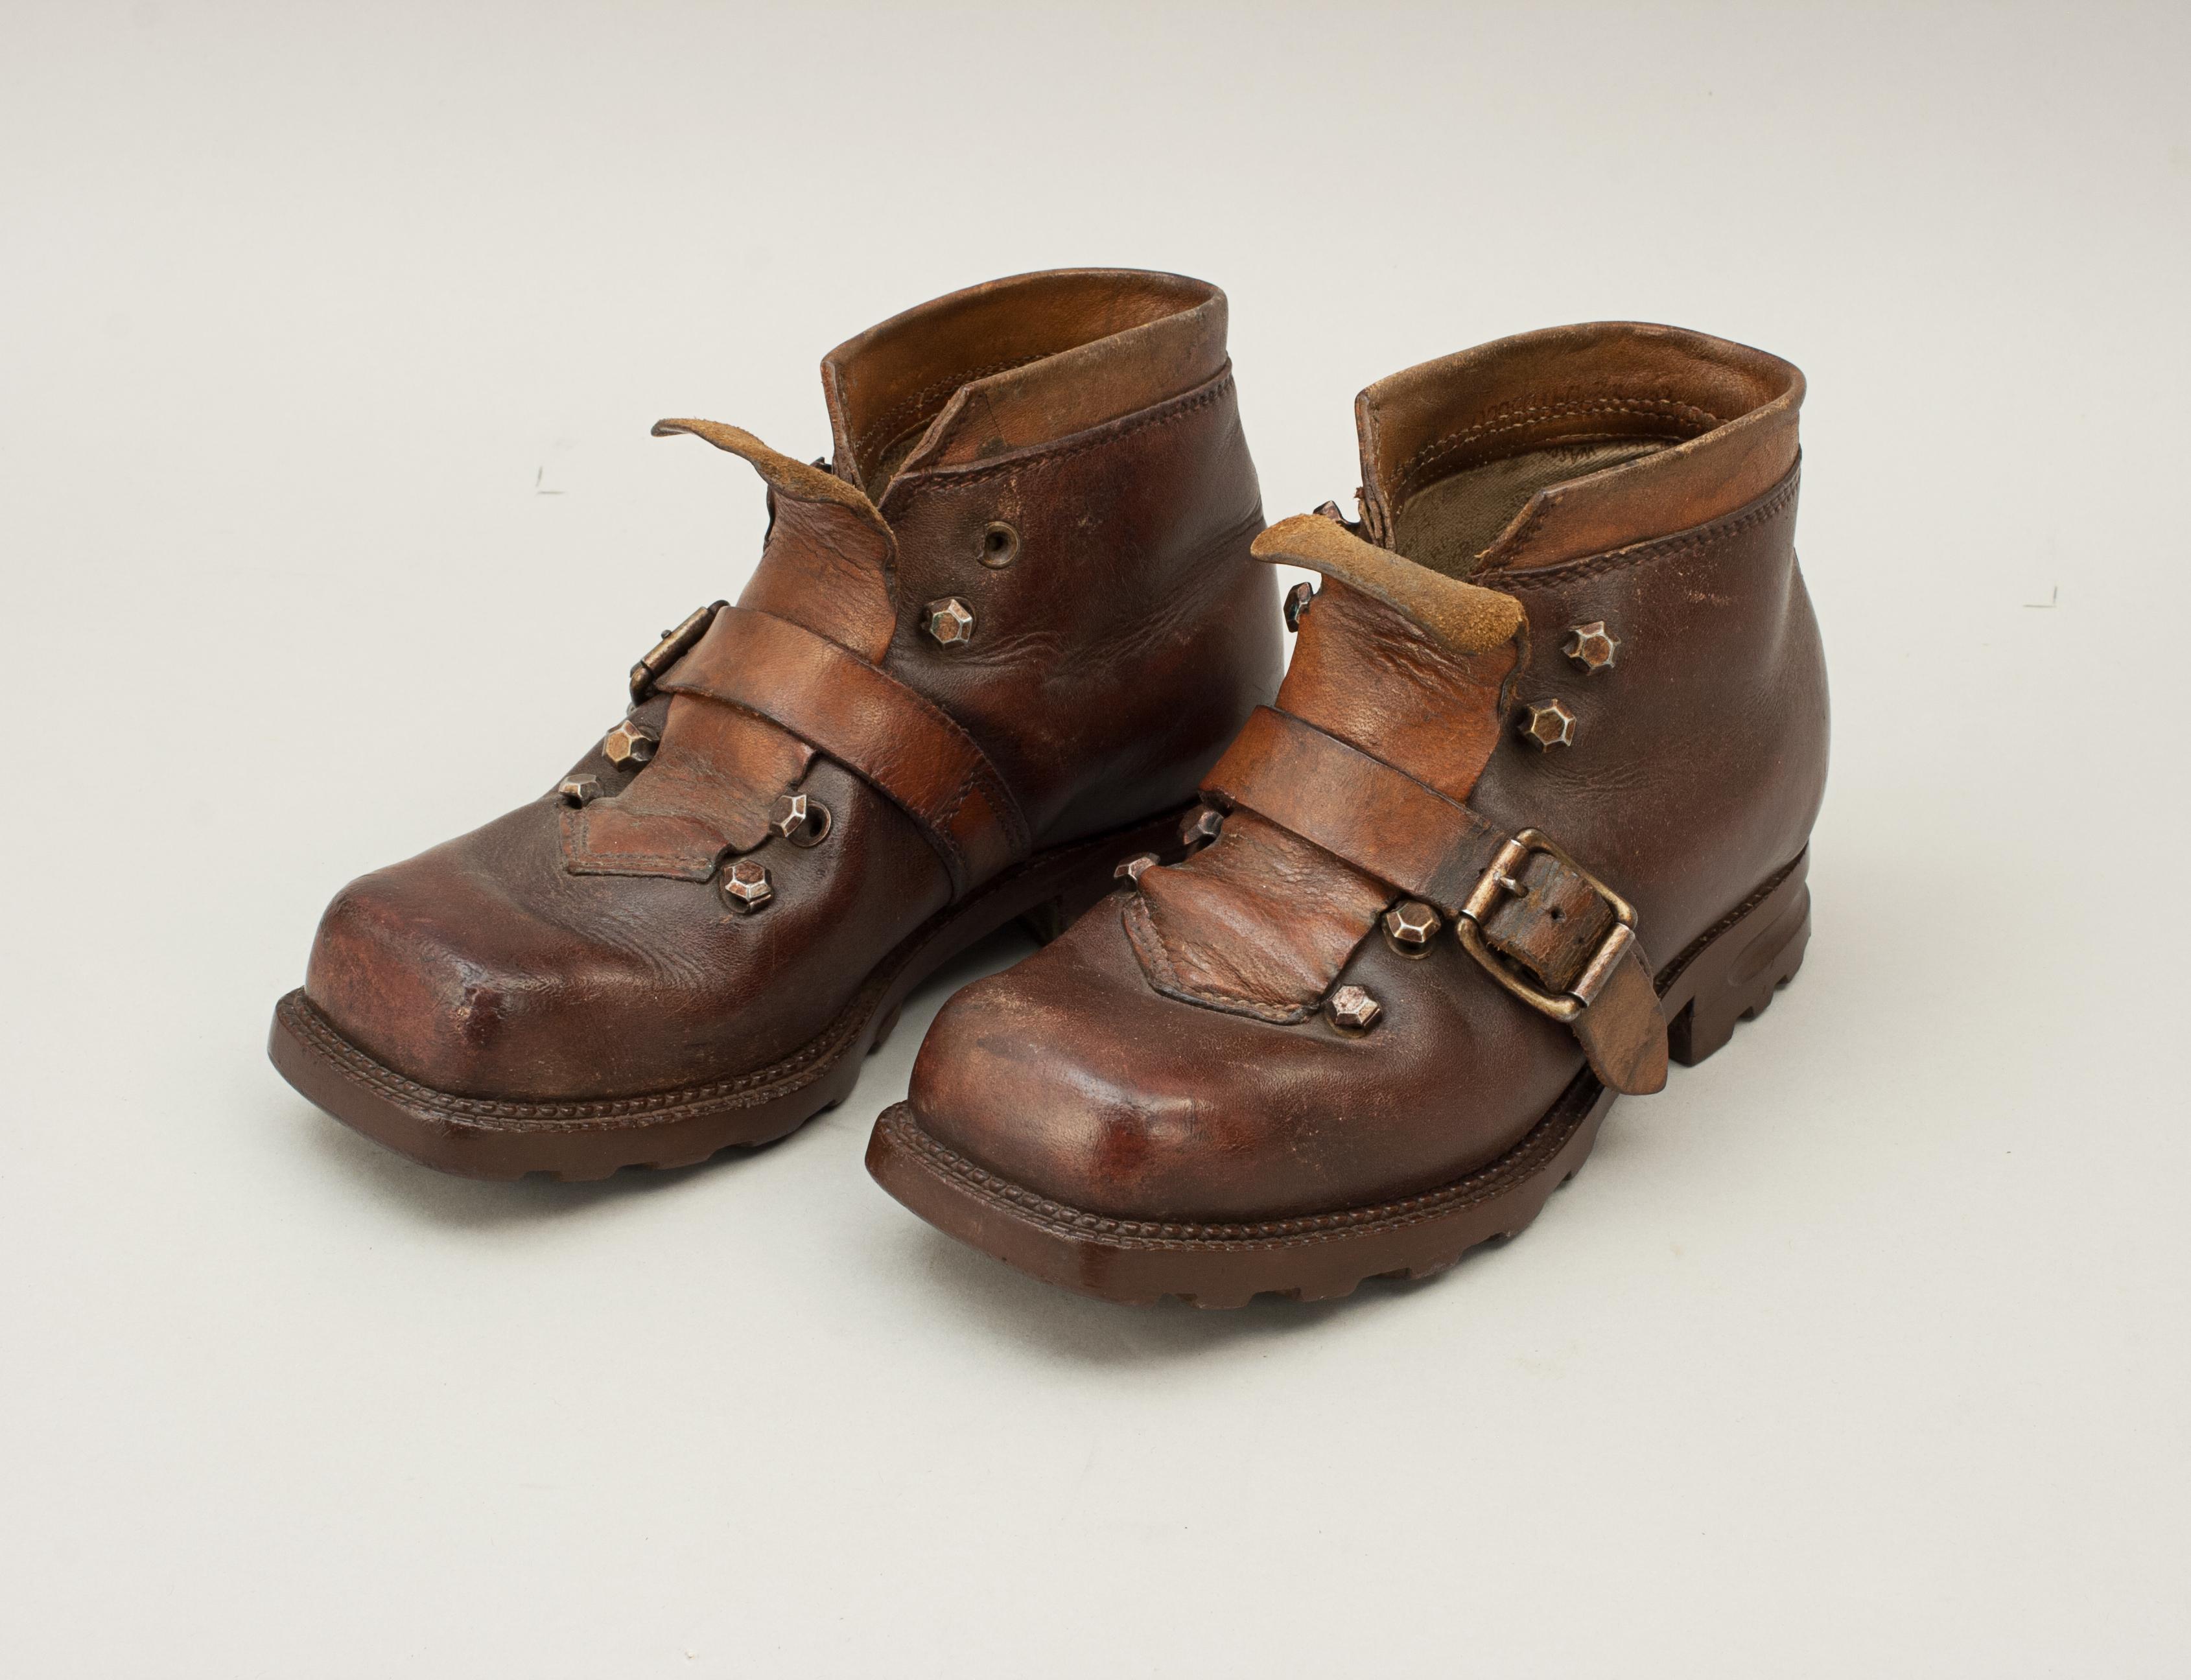 Child's waterproof leather ski boots.
A pair of children's German square toe leather ski boots. The brown leather on the boots is in excellent condition, the interior material slightly frayed in the heel area. The material stamped 'Wasserdicht',